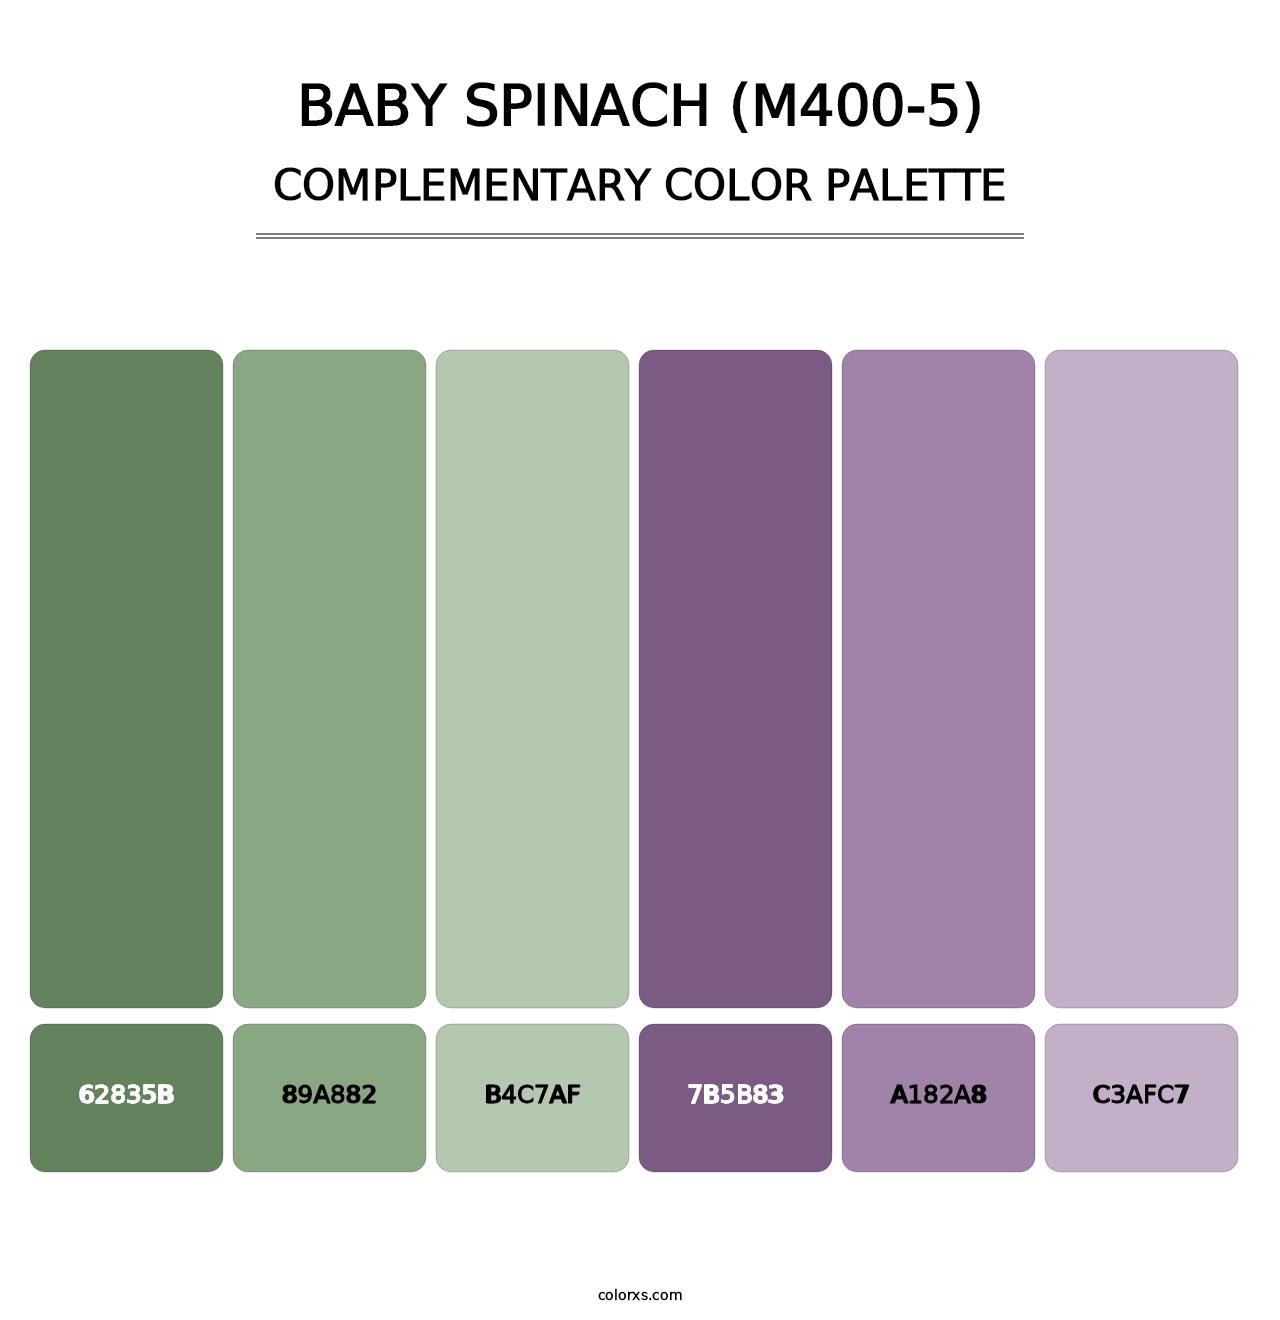 Baby Spinach (M400-5) - Complementary Color Palette